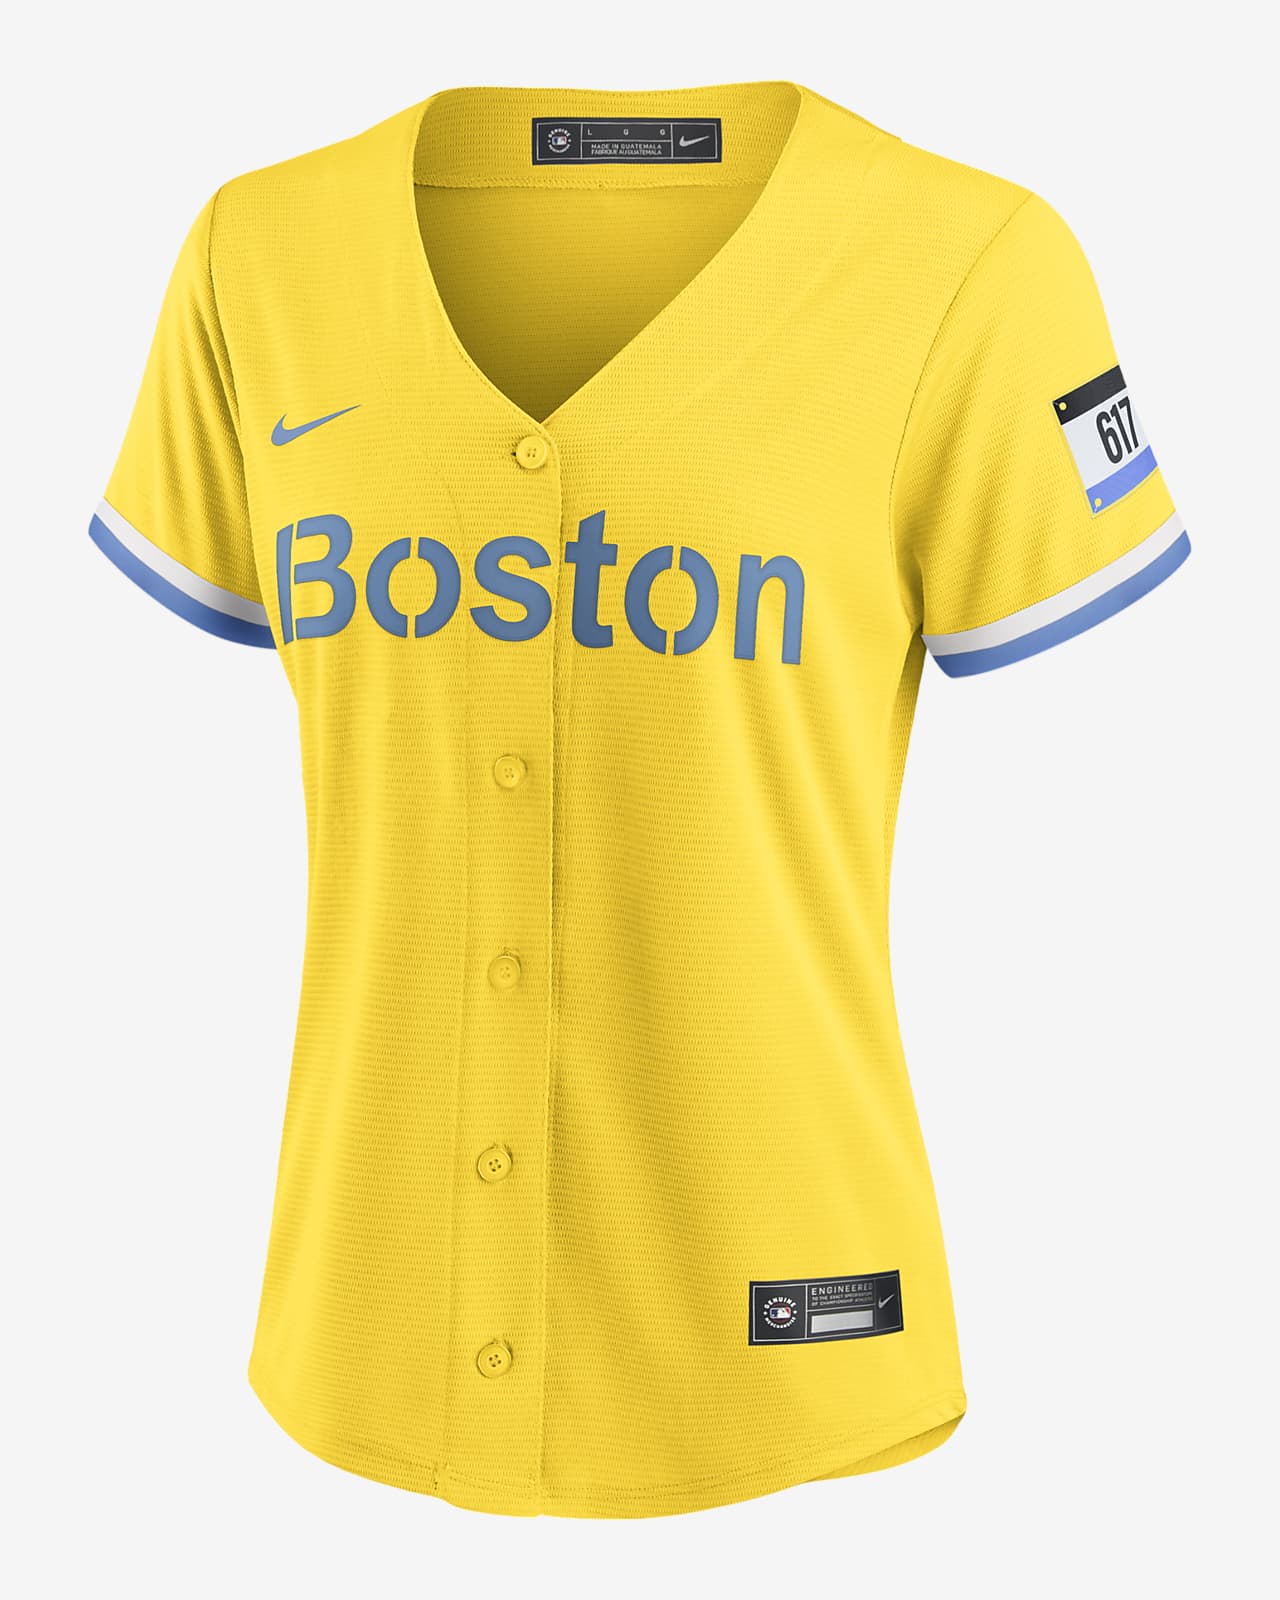 top selling red sox jerseys